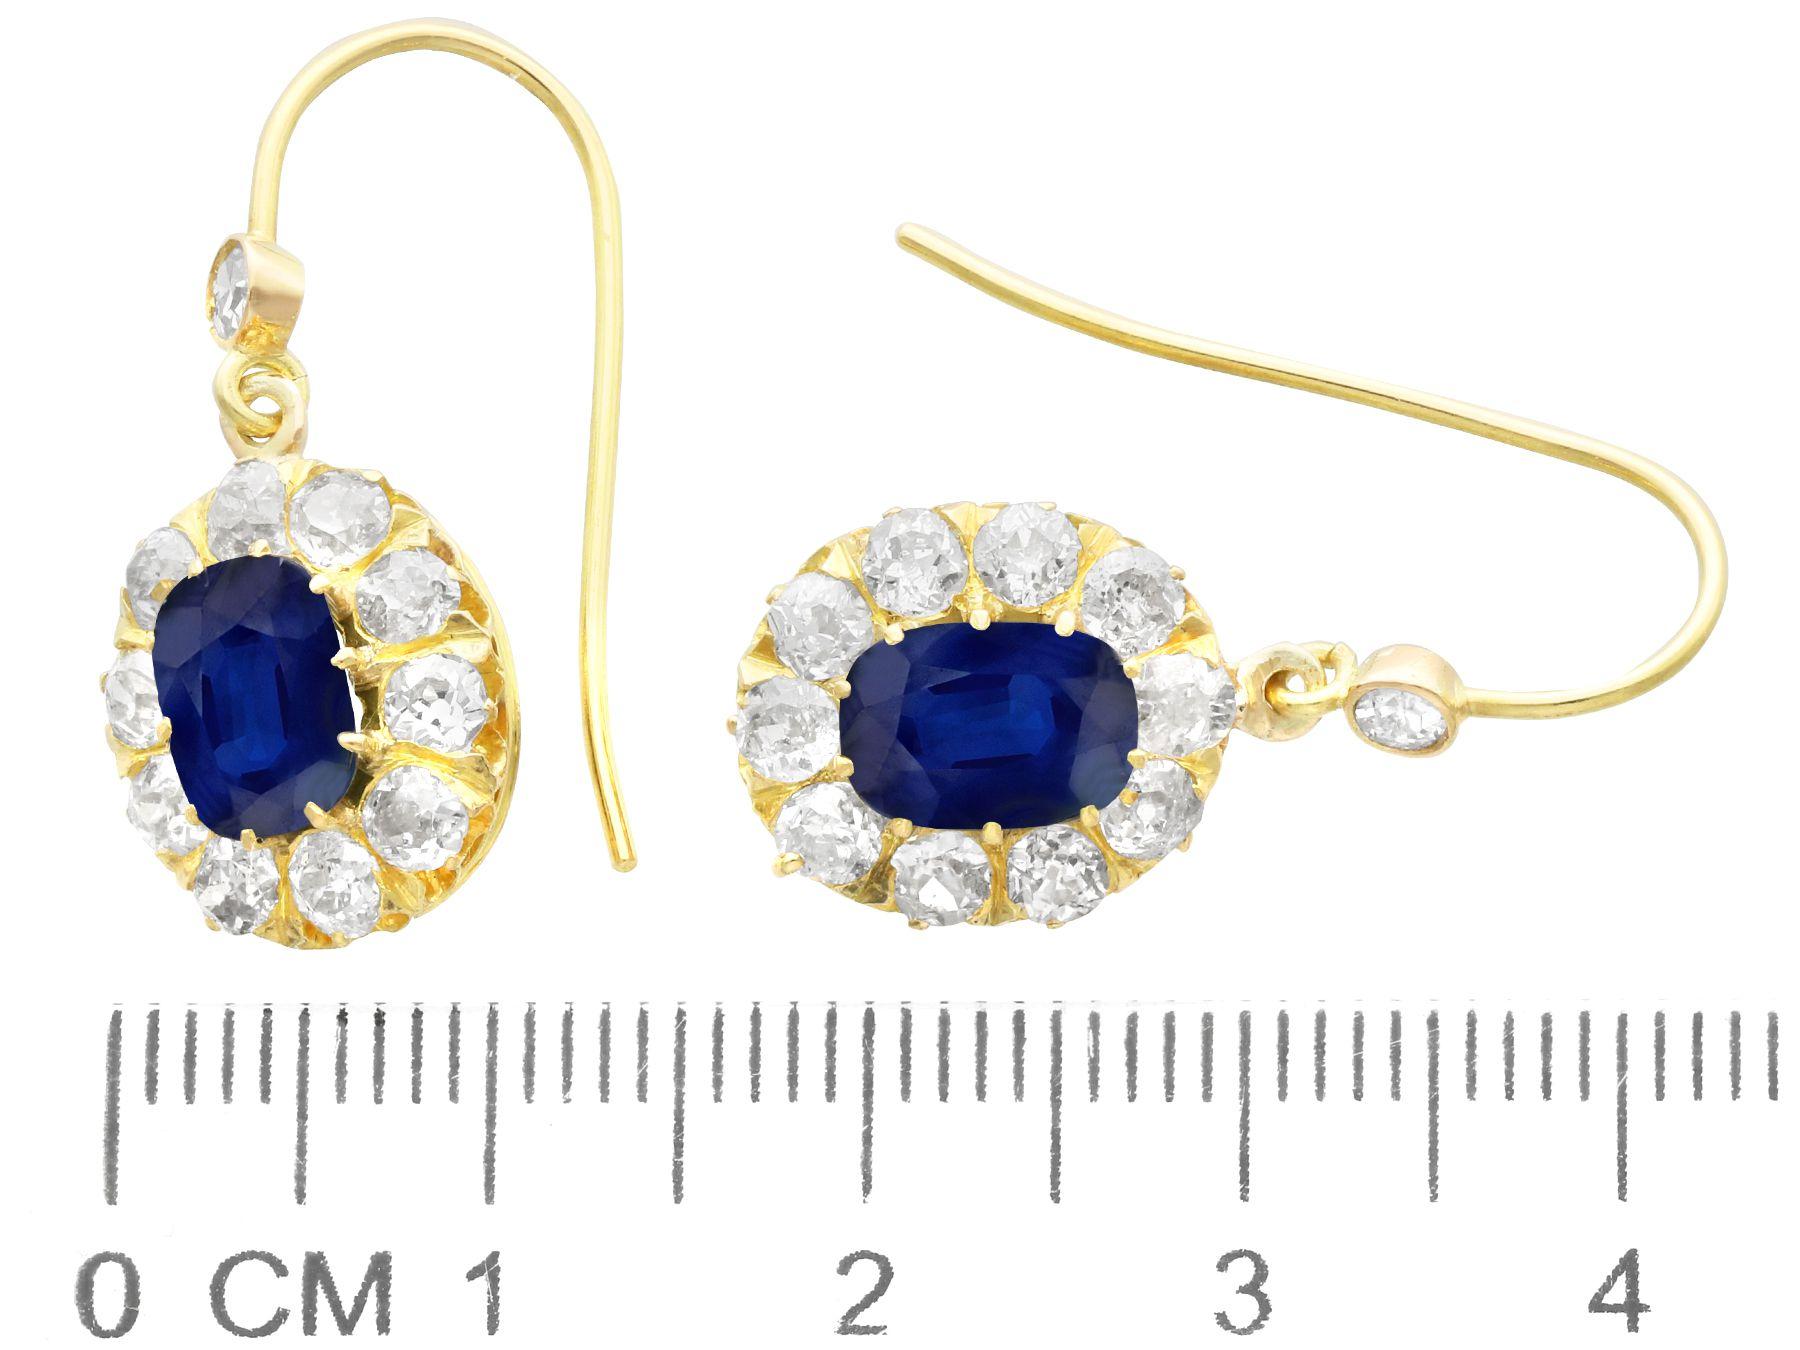 Antique 2.22 Ct Sapphire and 1.20 Ct Diamond 15 Carat Yellow Gold Drop Earrings For Sale 3